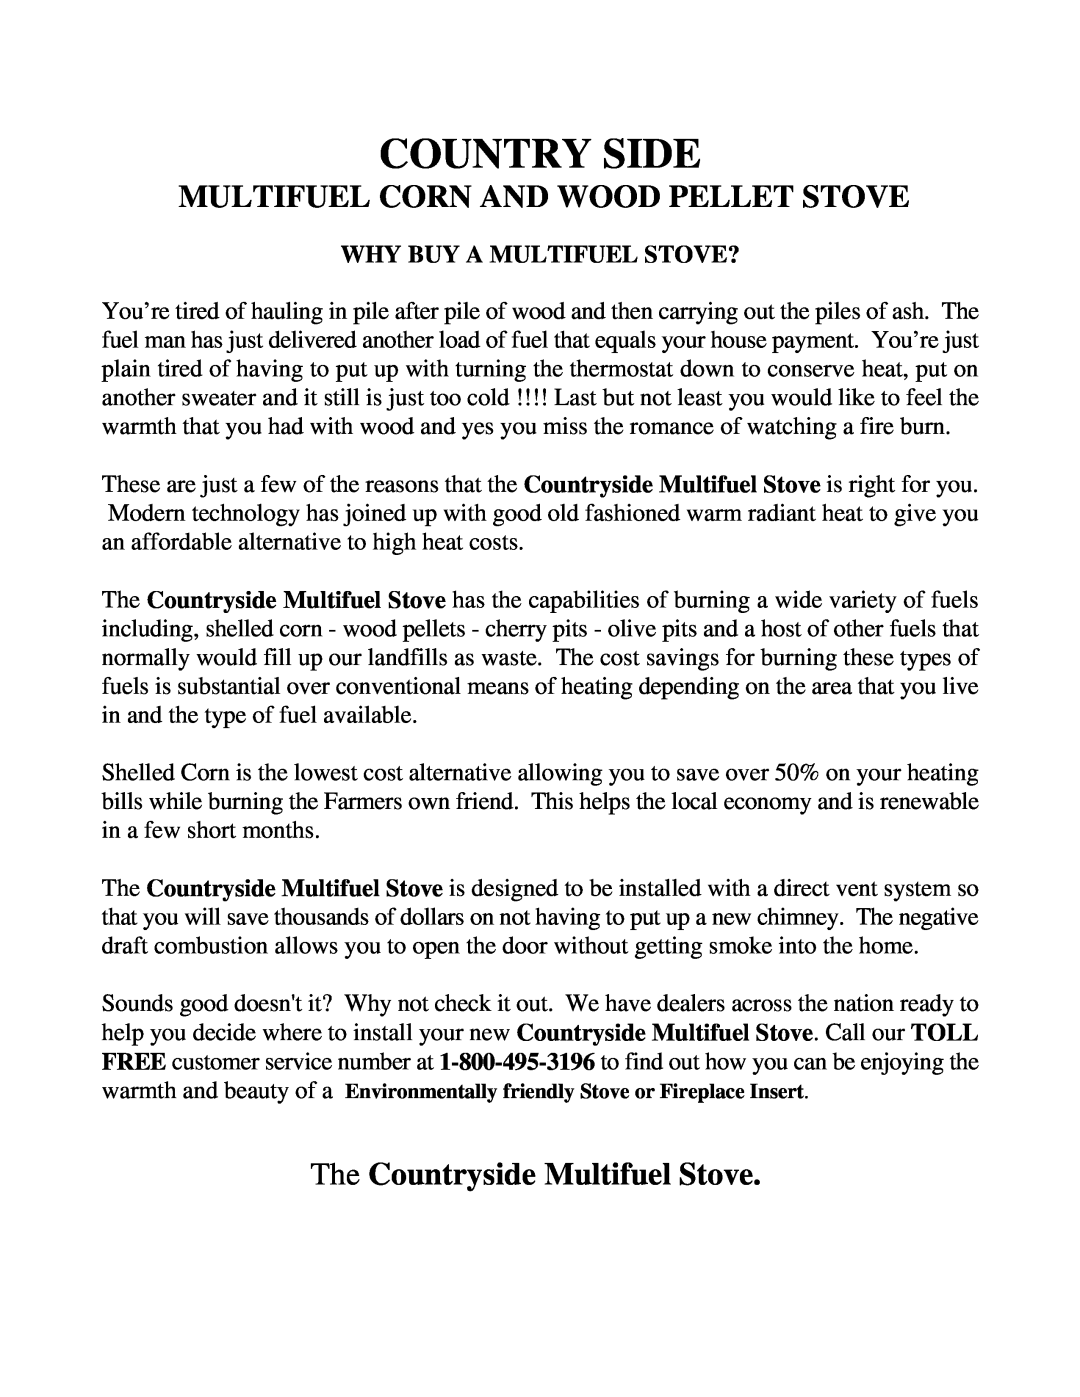 Country Flame Countyside manual Country Side, Multifuel Corn And Wood Pellet Stove, The Countryside Multifuel Stove 